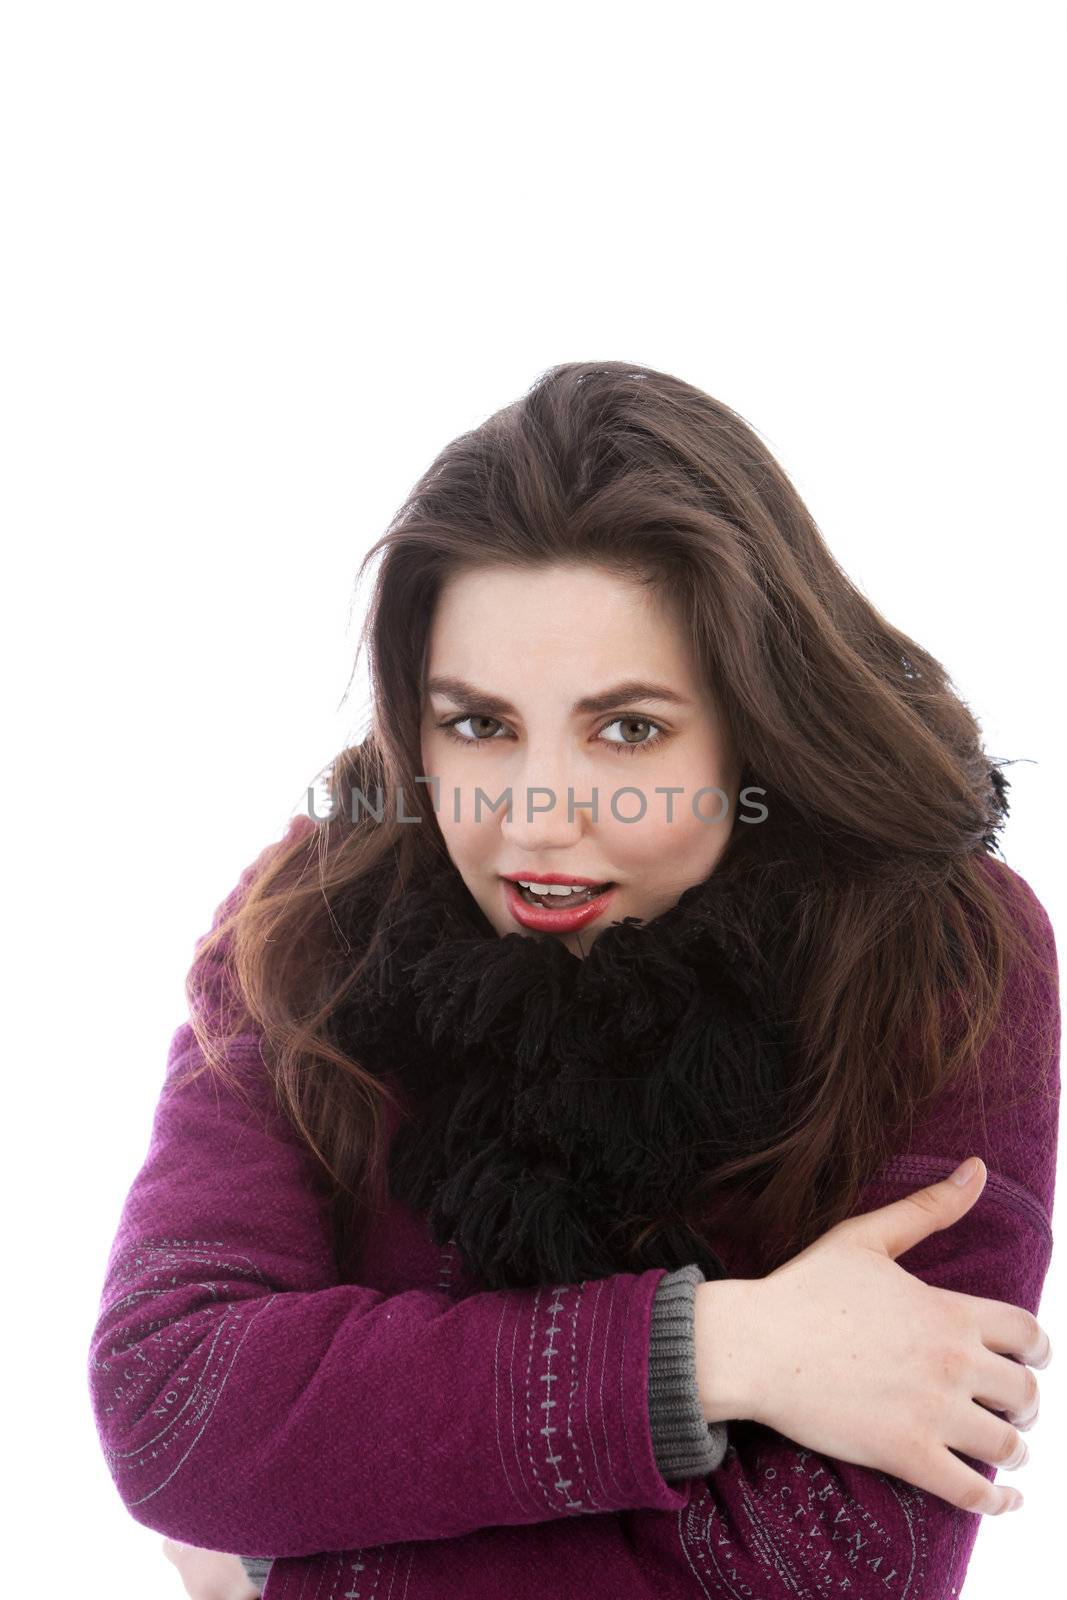 Beautiful cold woman in winter clothing standing hugging herself around the arms isolated on white